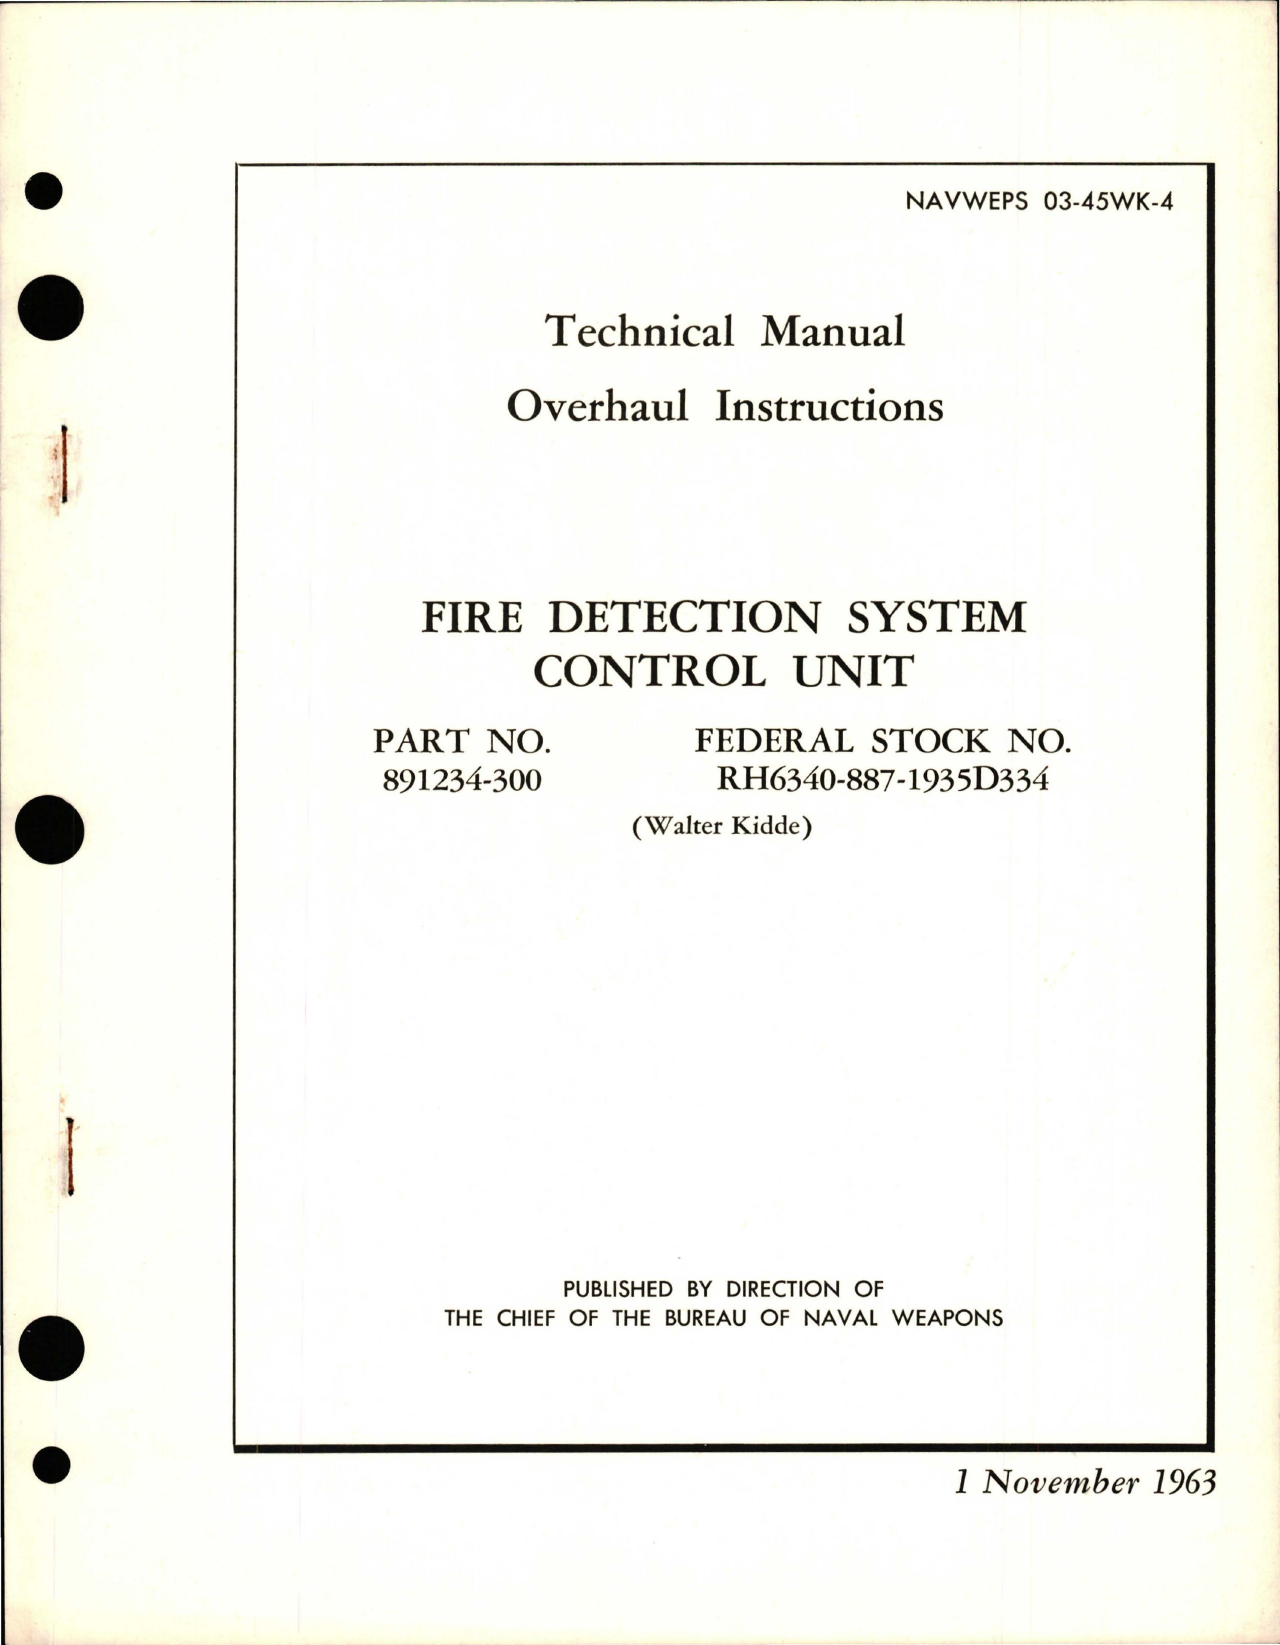 Sample page 1 from AirCorps Library document: Overhaul Instructions for Fire Detection System Control Unit - Part 891234-300